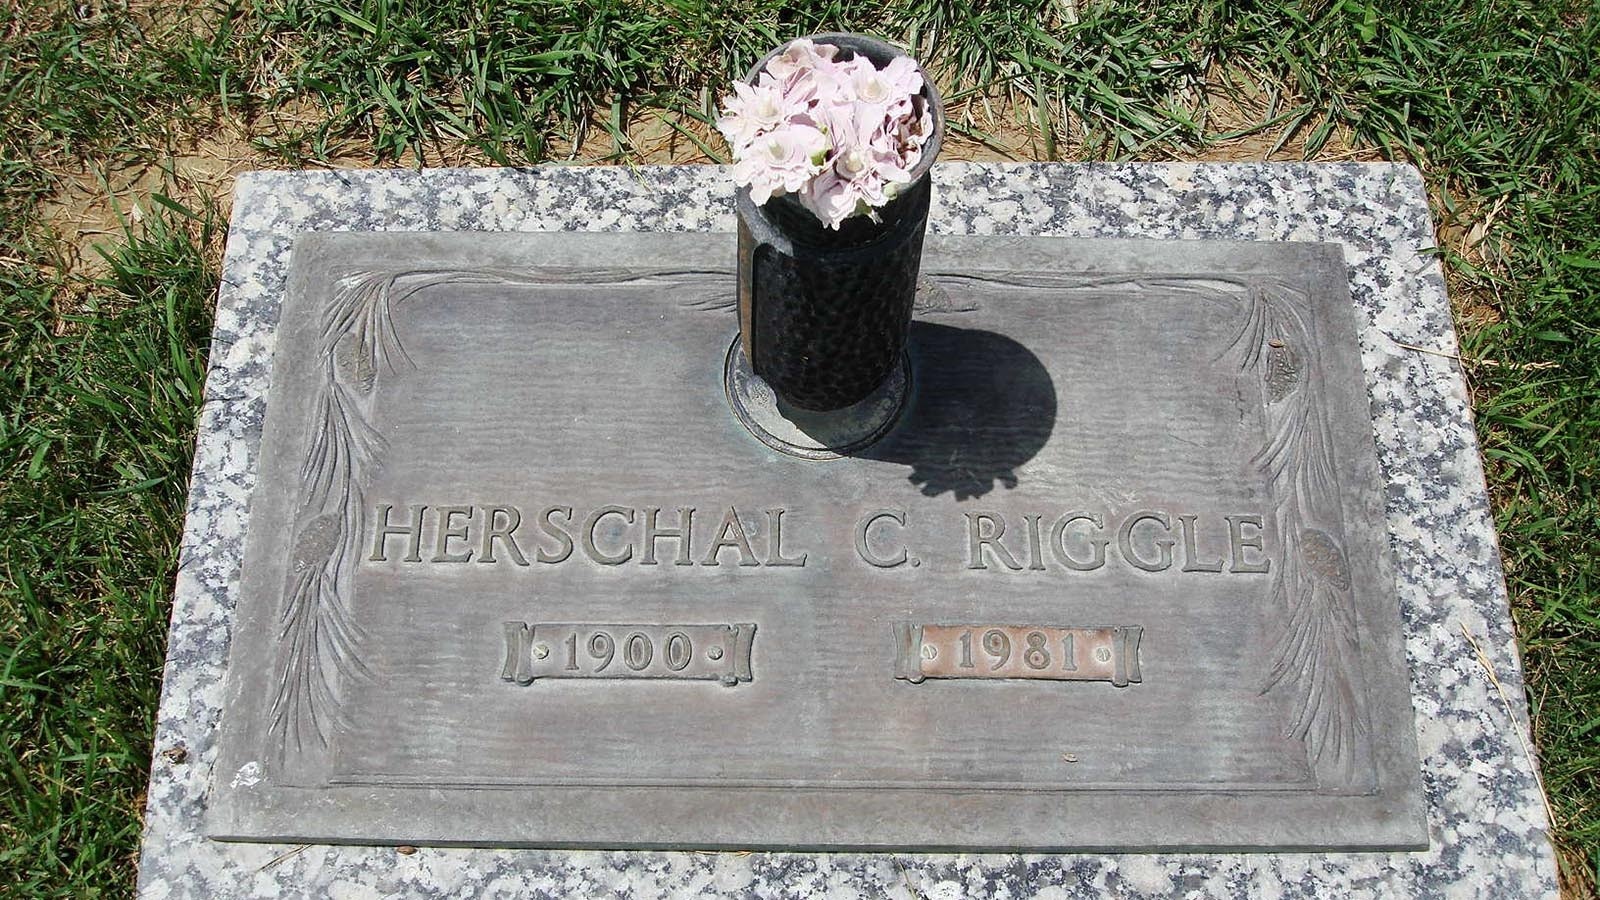 Herschal "Tricky" Riggle is buried in Rock Springs, Wyoming.